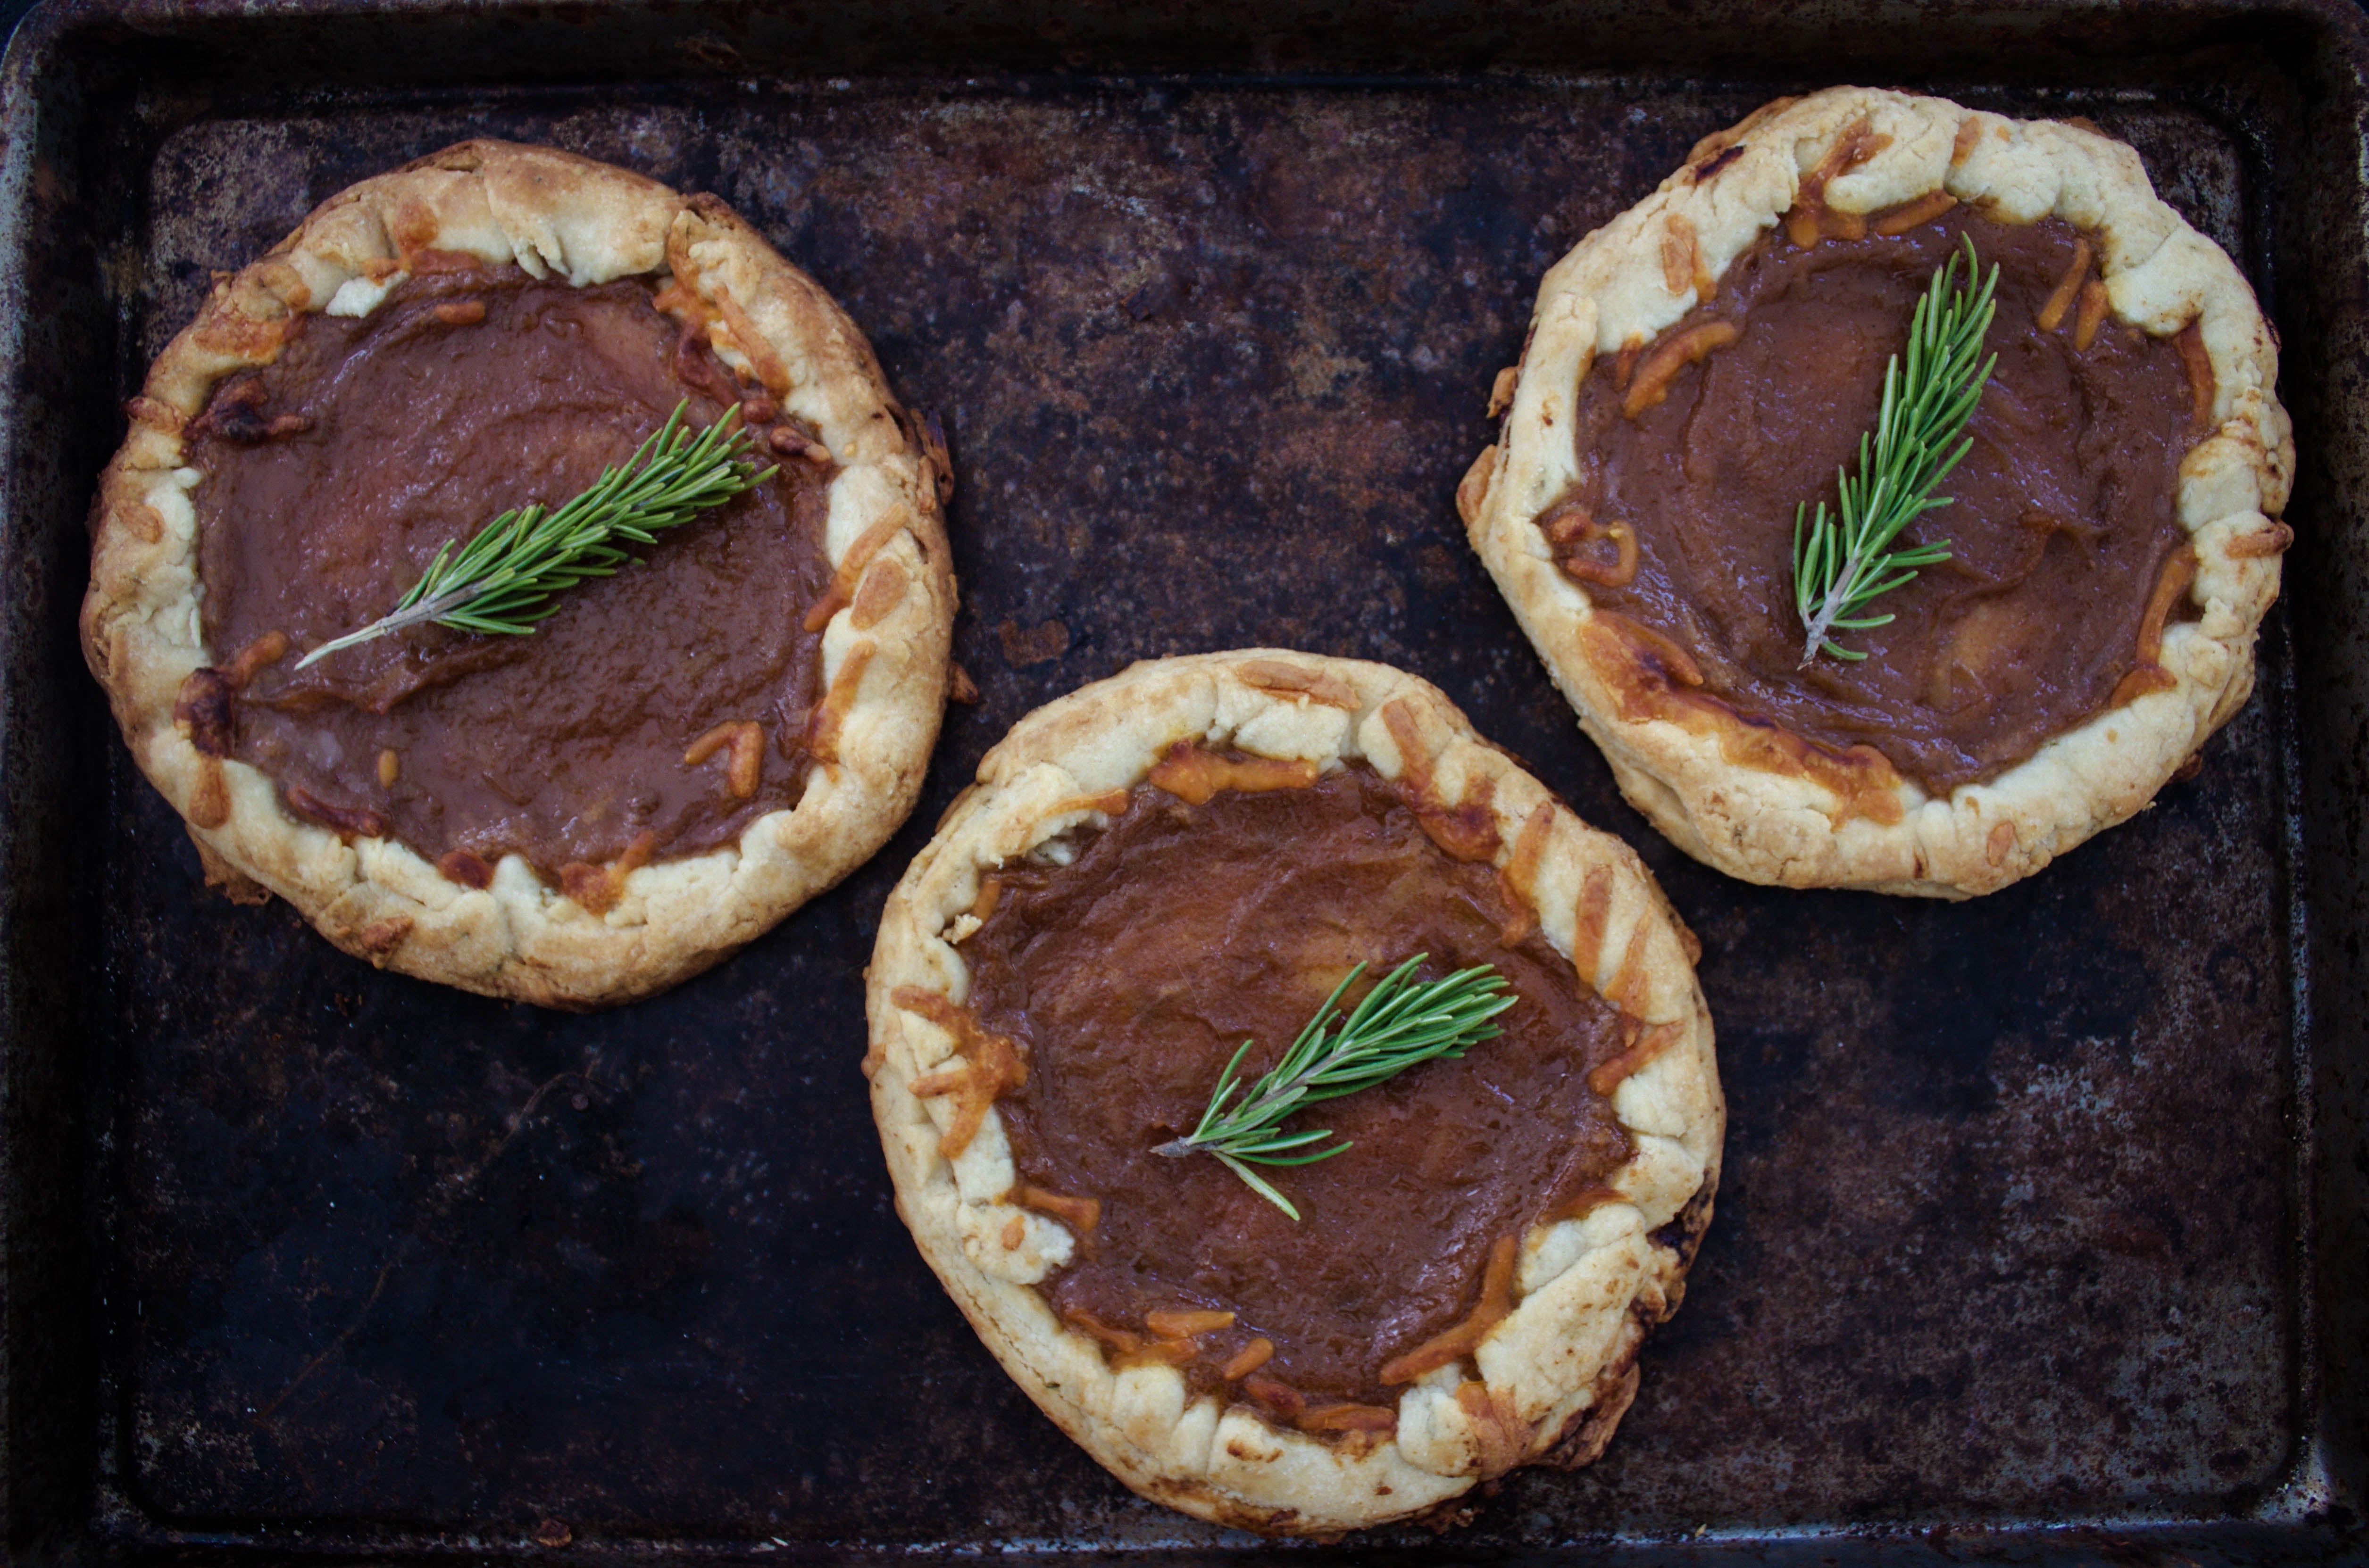 Cheddar-Apple Butter Galettes